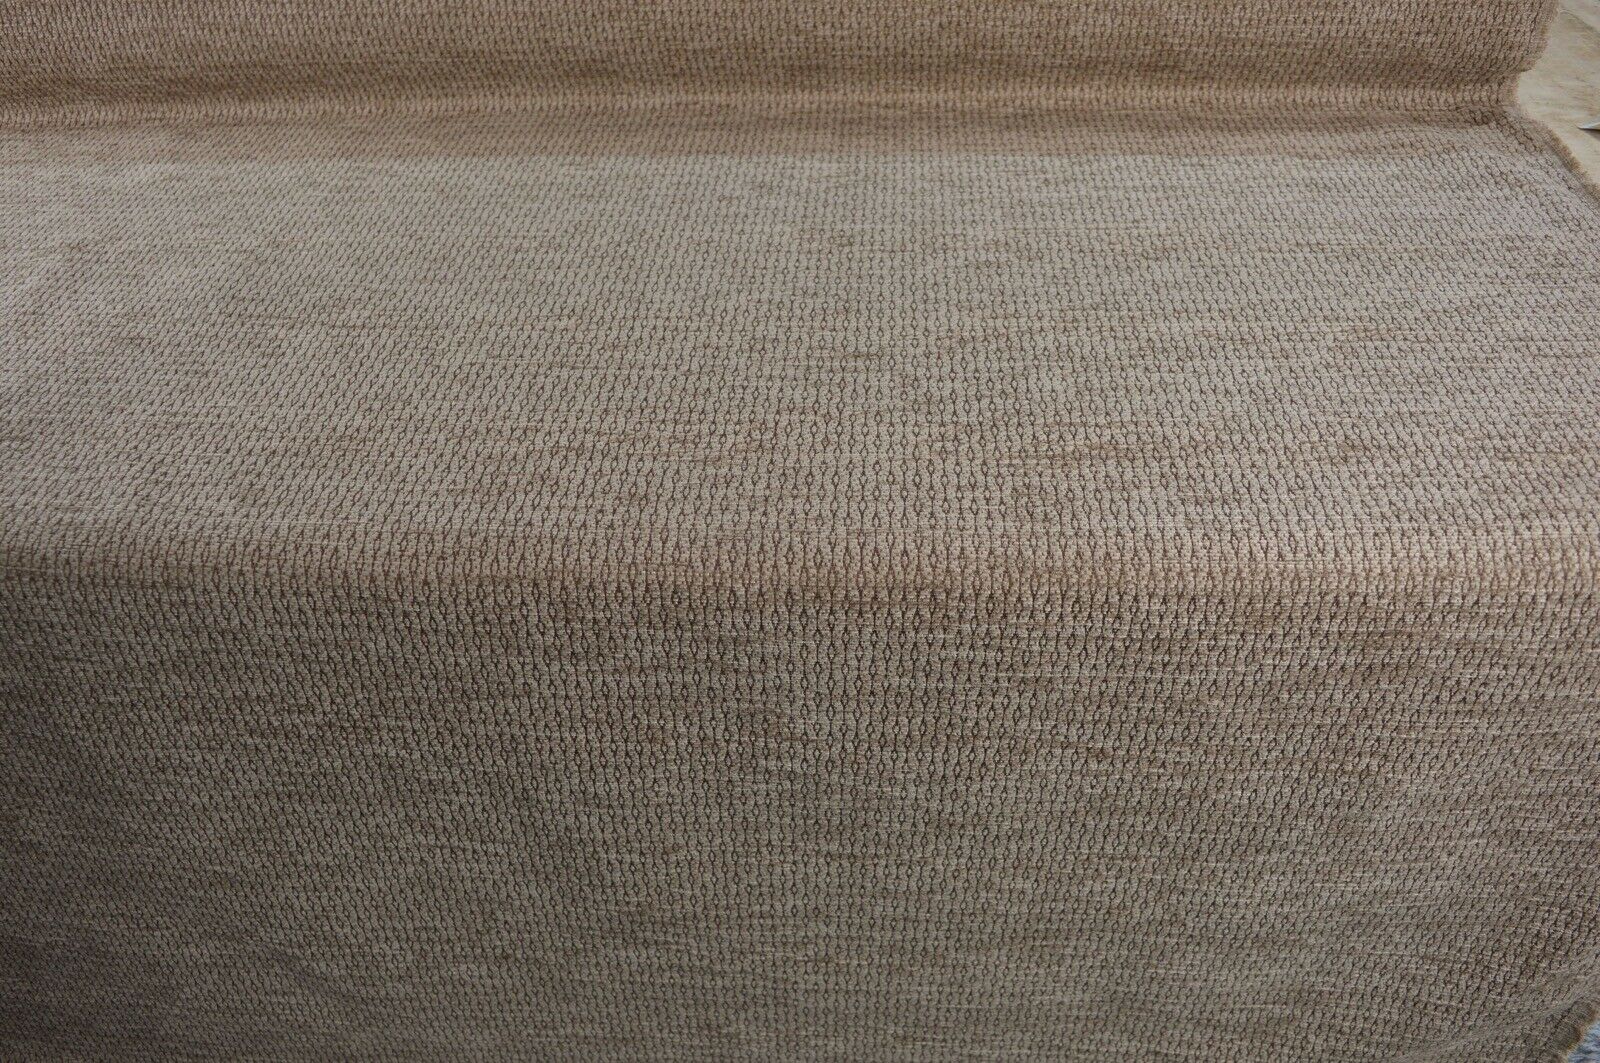 gold brown beige upholstery fabric textured chenille robust durable ...